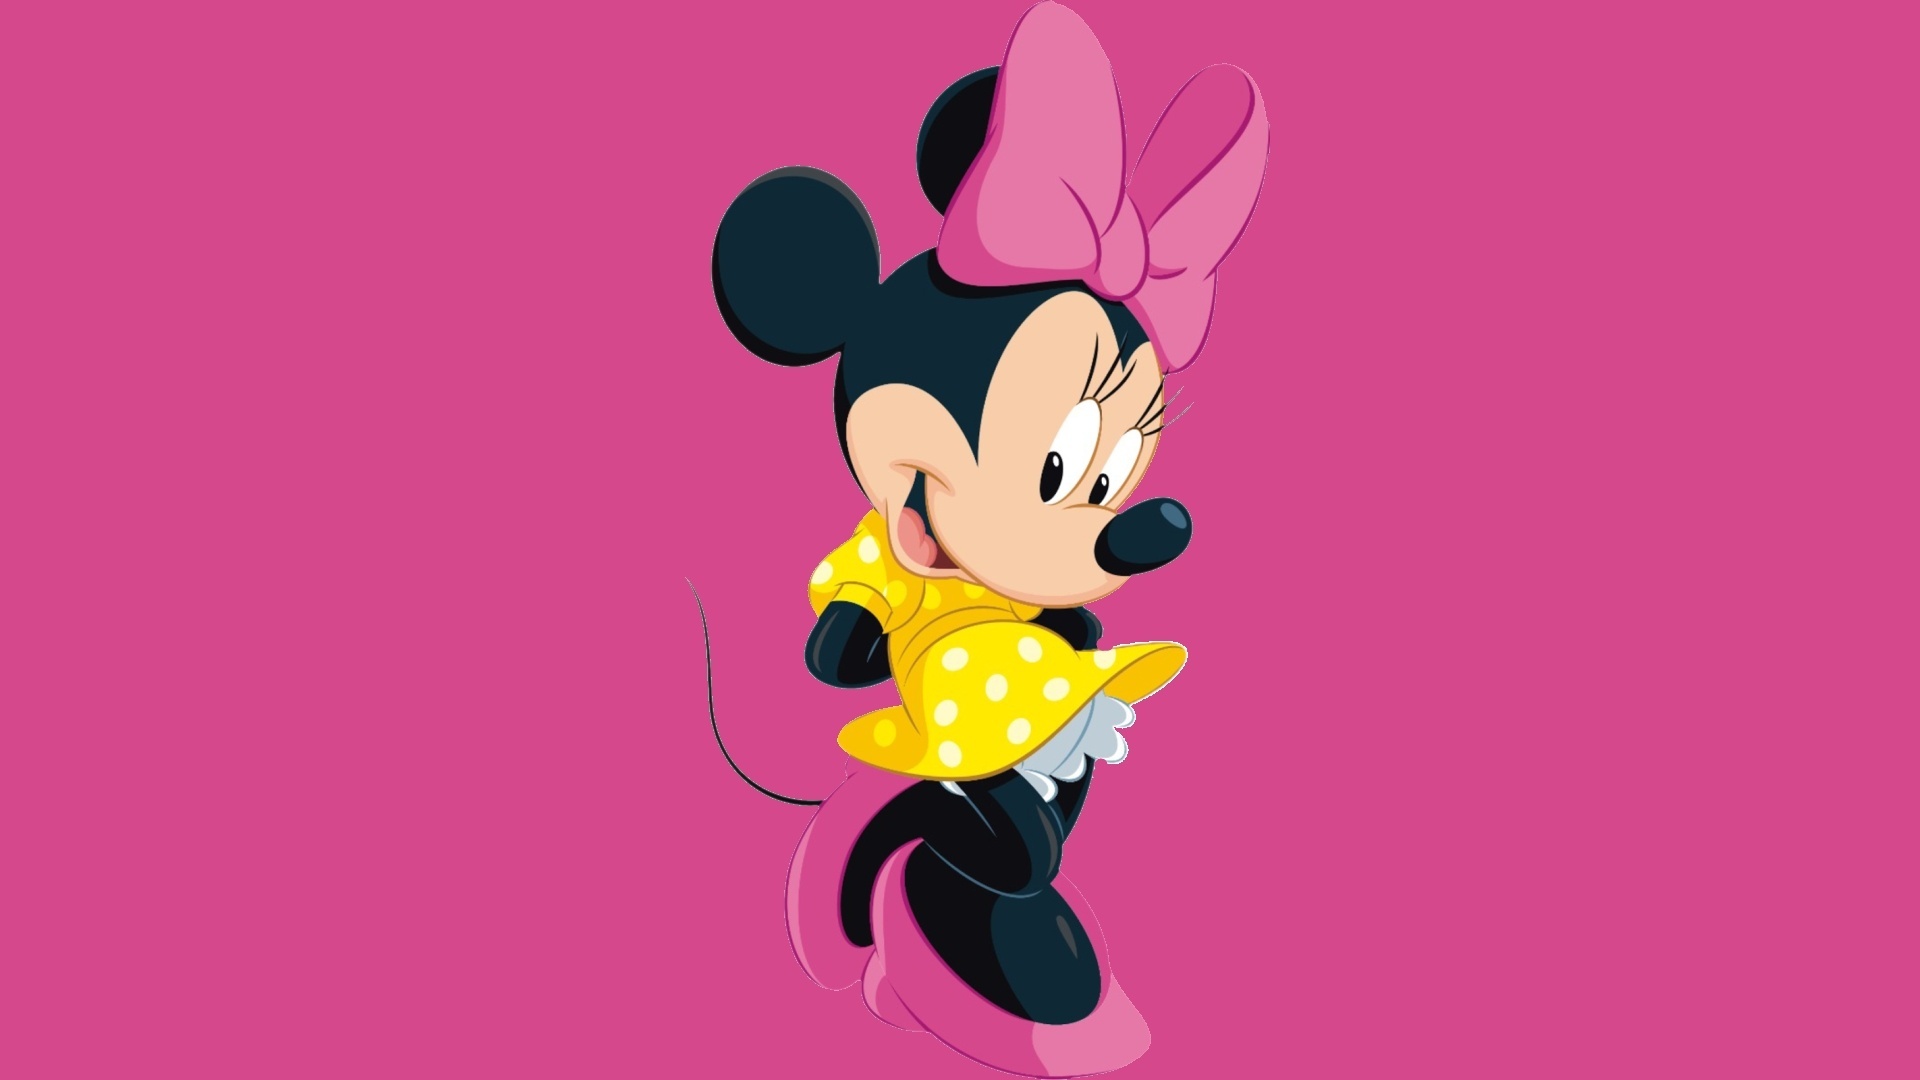 Minnie Mouse Mickey Mouse Pictures HD Wallpapers Download Free Images Wallpaper [wallpaper981.blogspot.com]